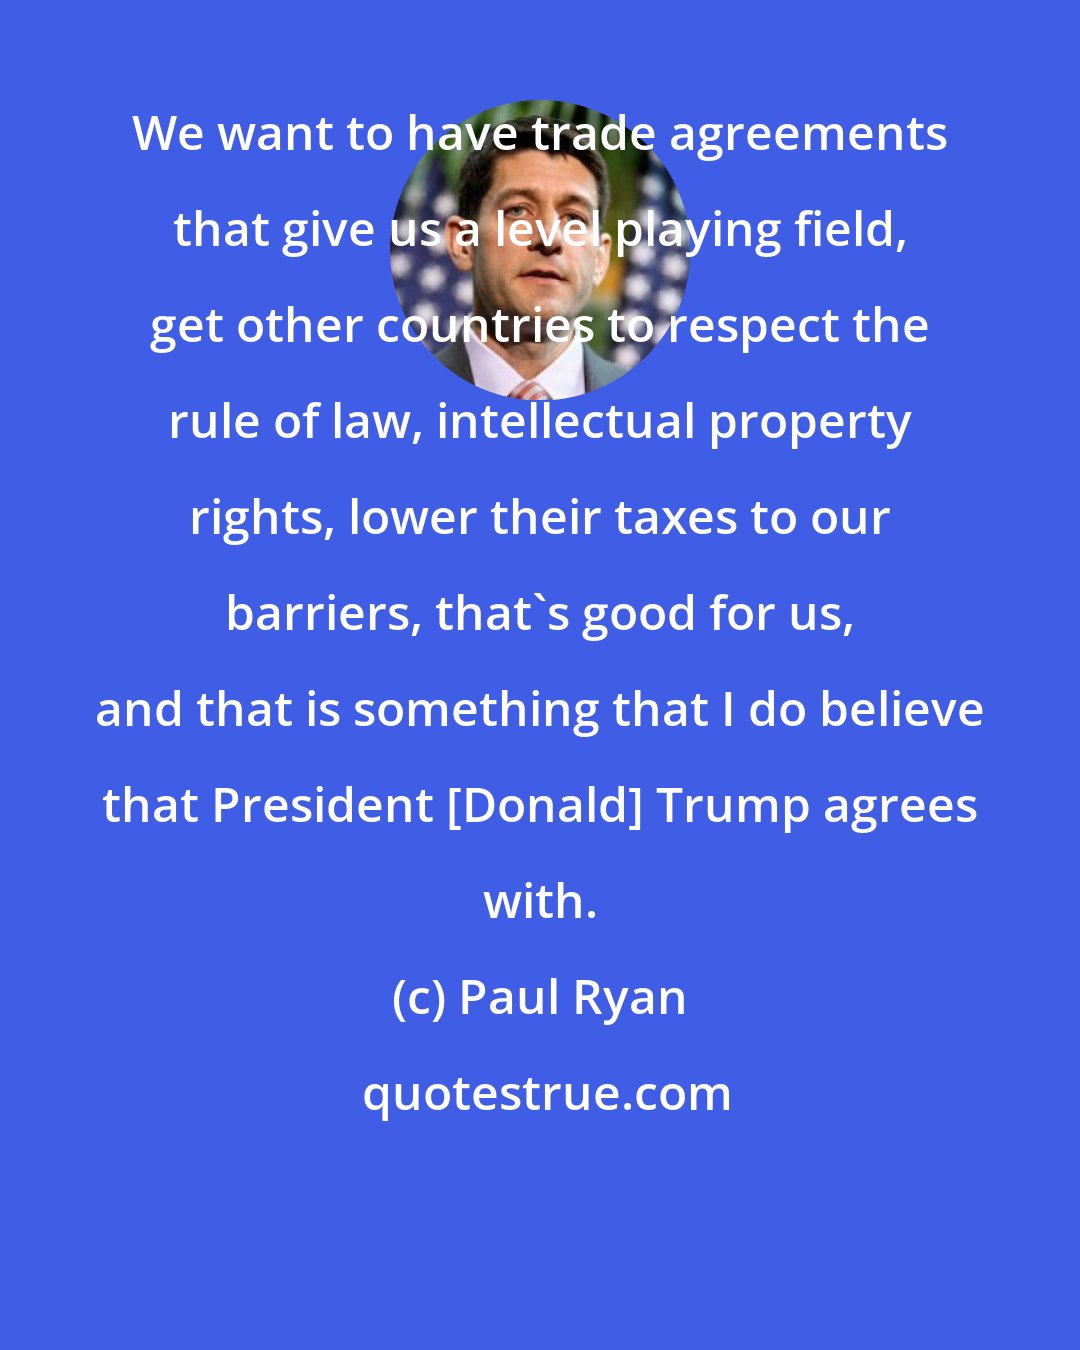 Paul Ryan: We want to have trade agreements that give us a level playing field, get other countries to respect the rule of law, intellectual property rights, lower their taxes to our barriers, that`s good for us, and that is something that I do believe that President [Donald] Trump agrees with.